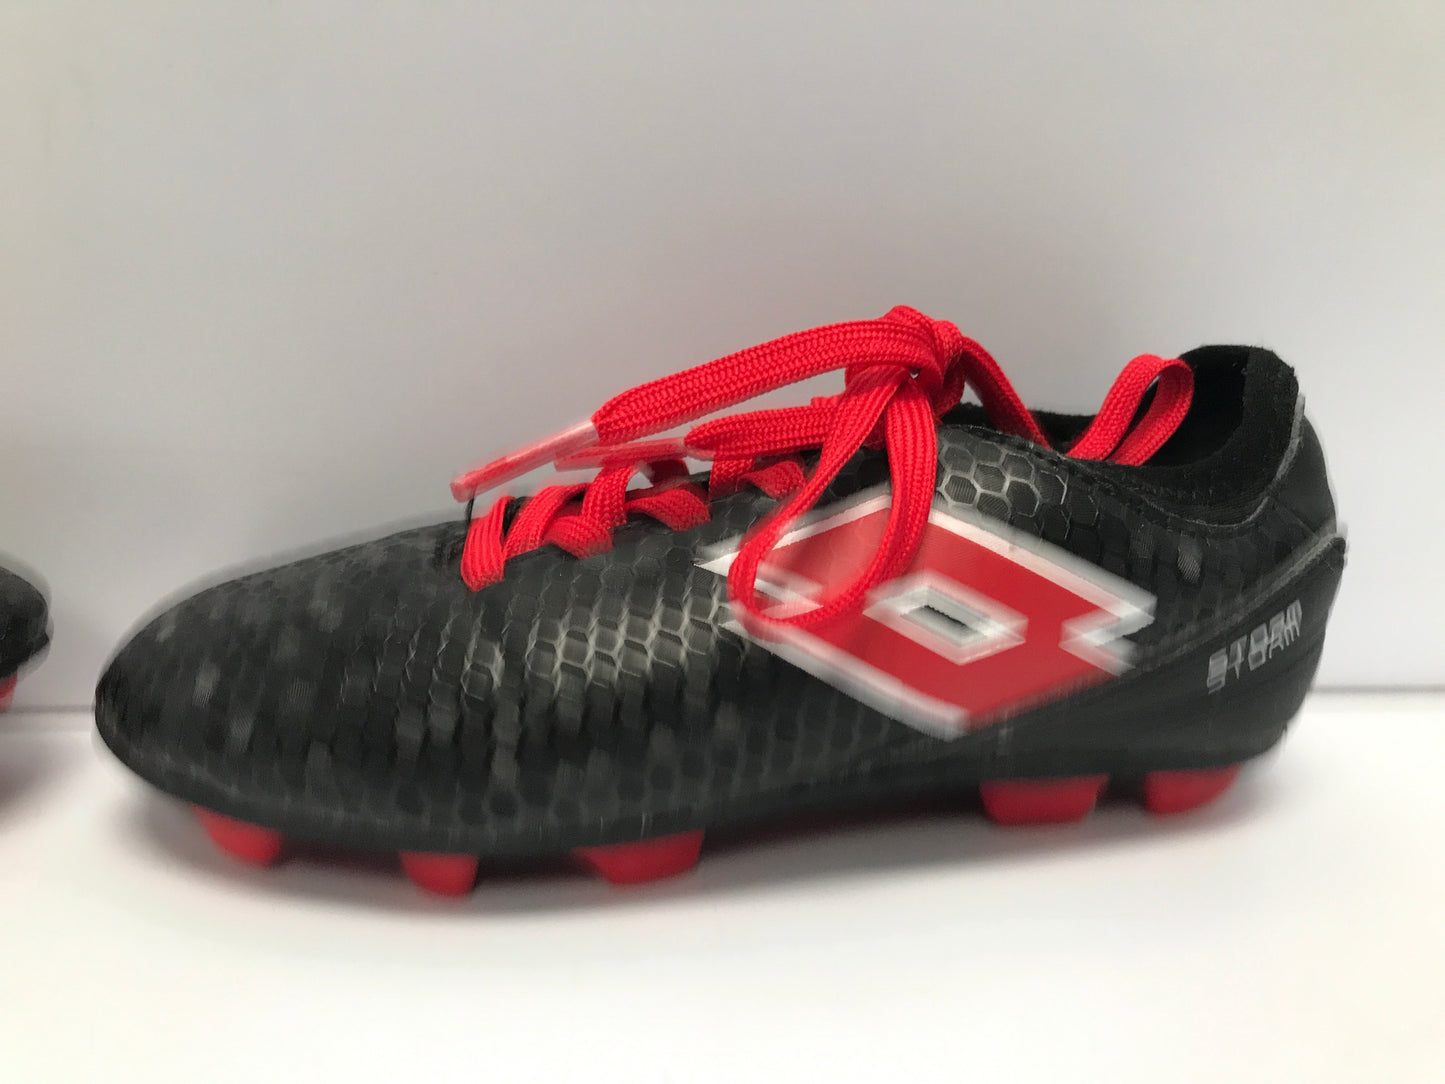 Soccer Shoes Cleats Child Size 11 Lotto Black Red Like New